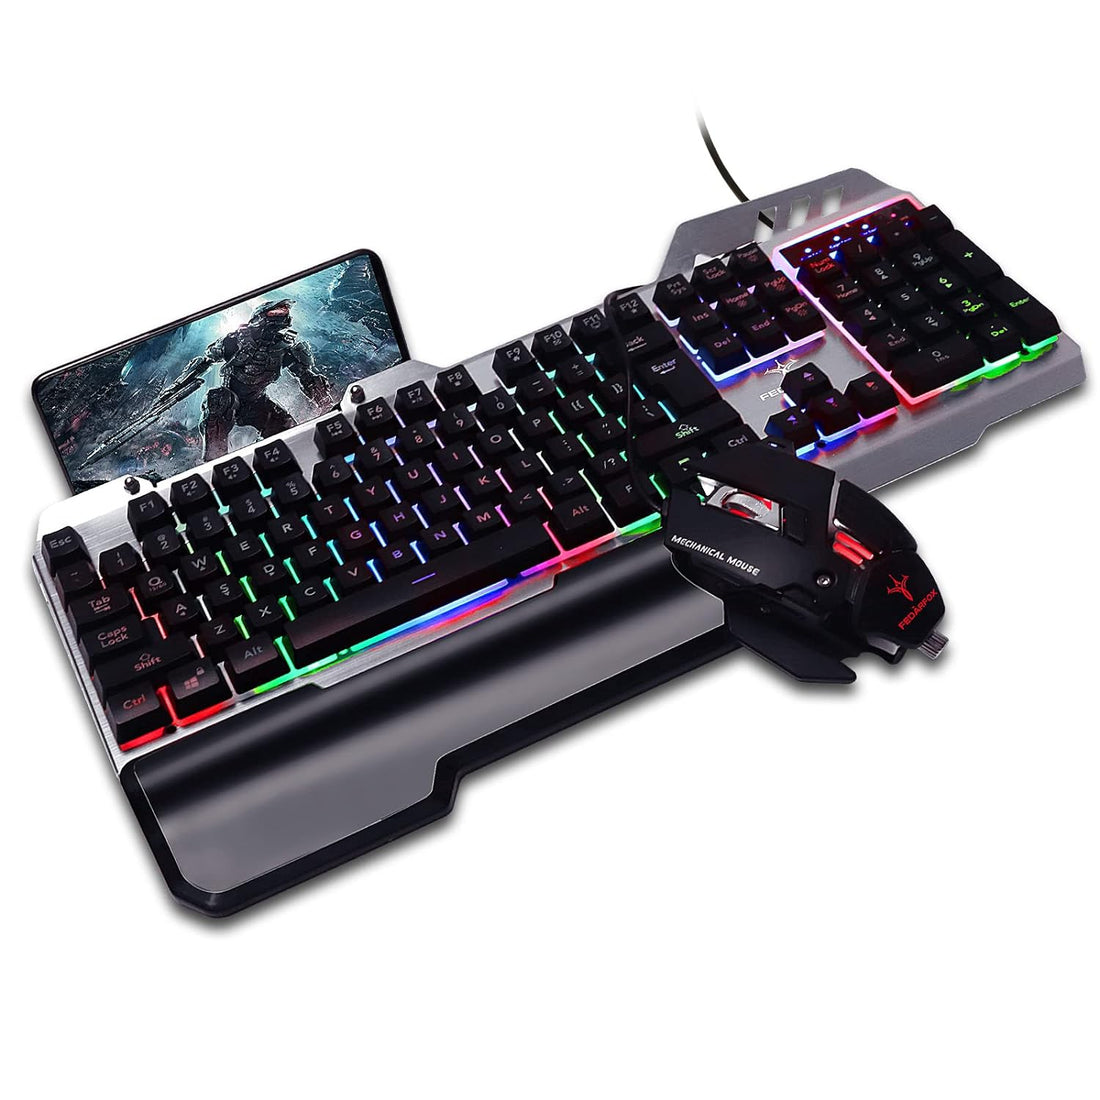 Keyboard and Mouse Combo, FEDARFOX Compact Full Size Gaming Rainbow Keyboard and Mouse Set Backlit Illuminated Mice Mechanical Keyboard for Windows, Computer, Desktop, PC, Notebook (Black)